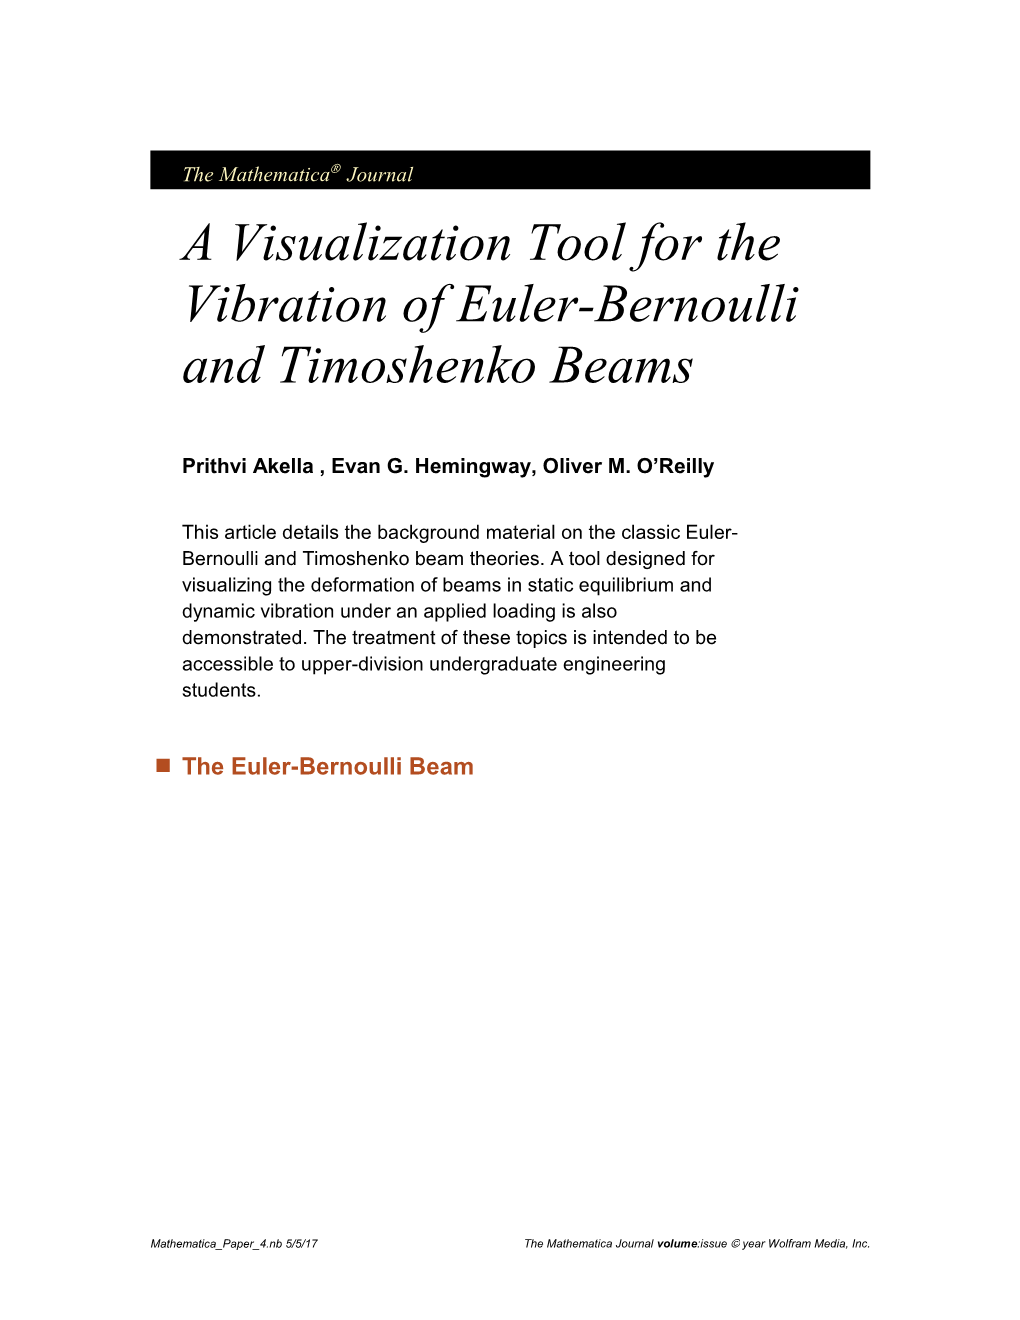 A Visualization Tool for the Vibration of Euler-Bernoulli and Timoshenko Beams